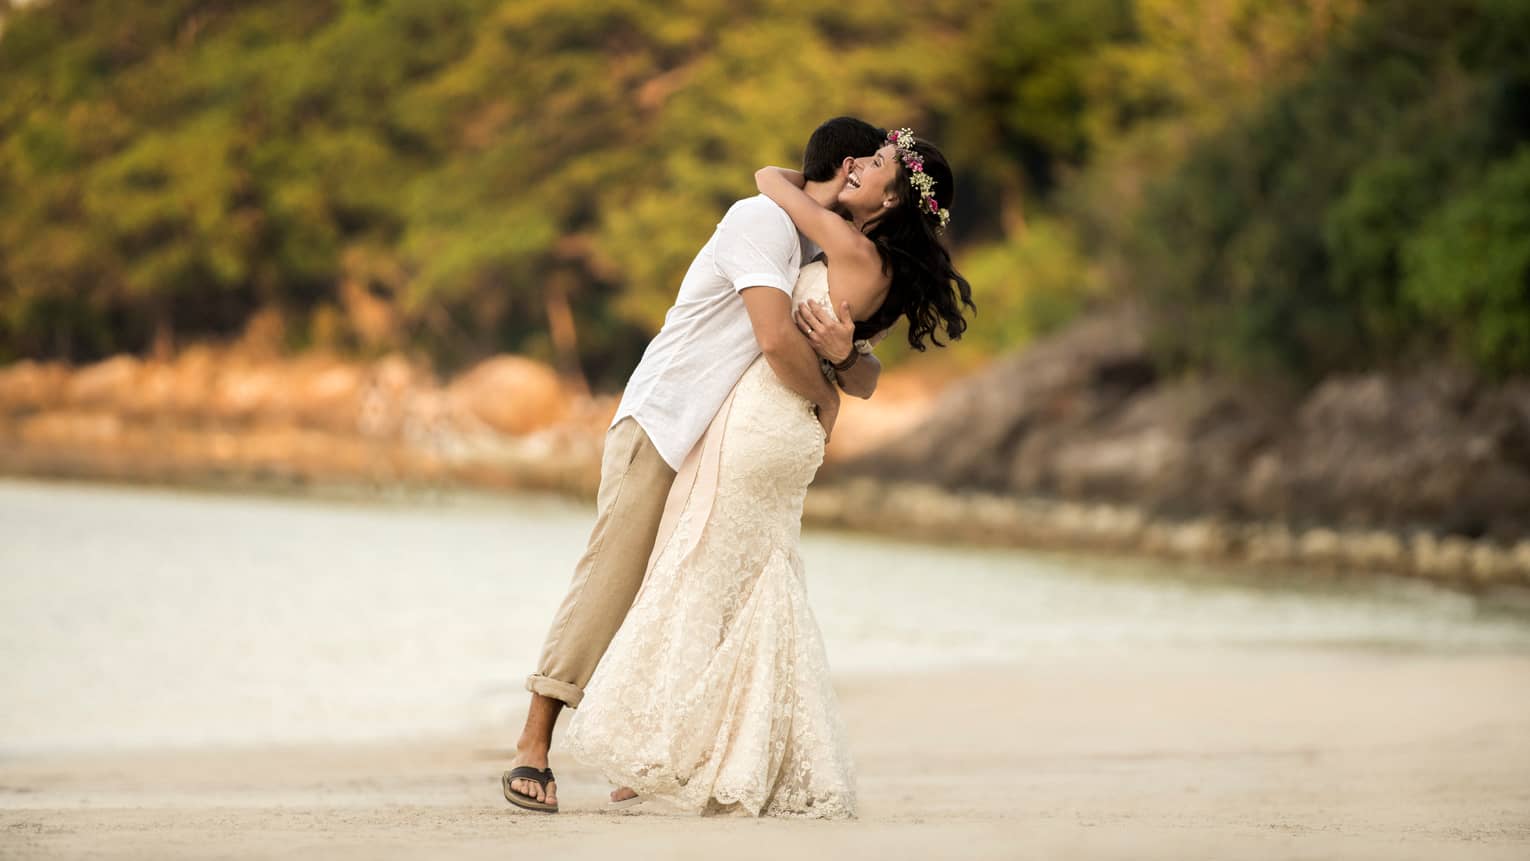 Man in white shirt and khaki pants, woman in long white wedding gown and flower crown embrace on the beach